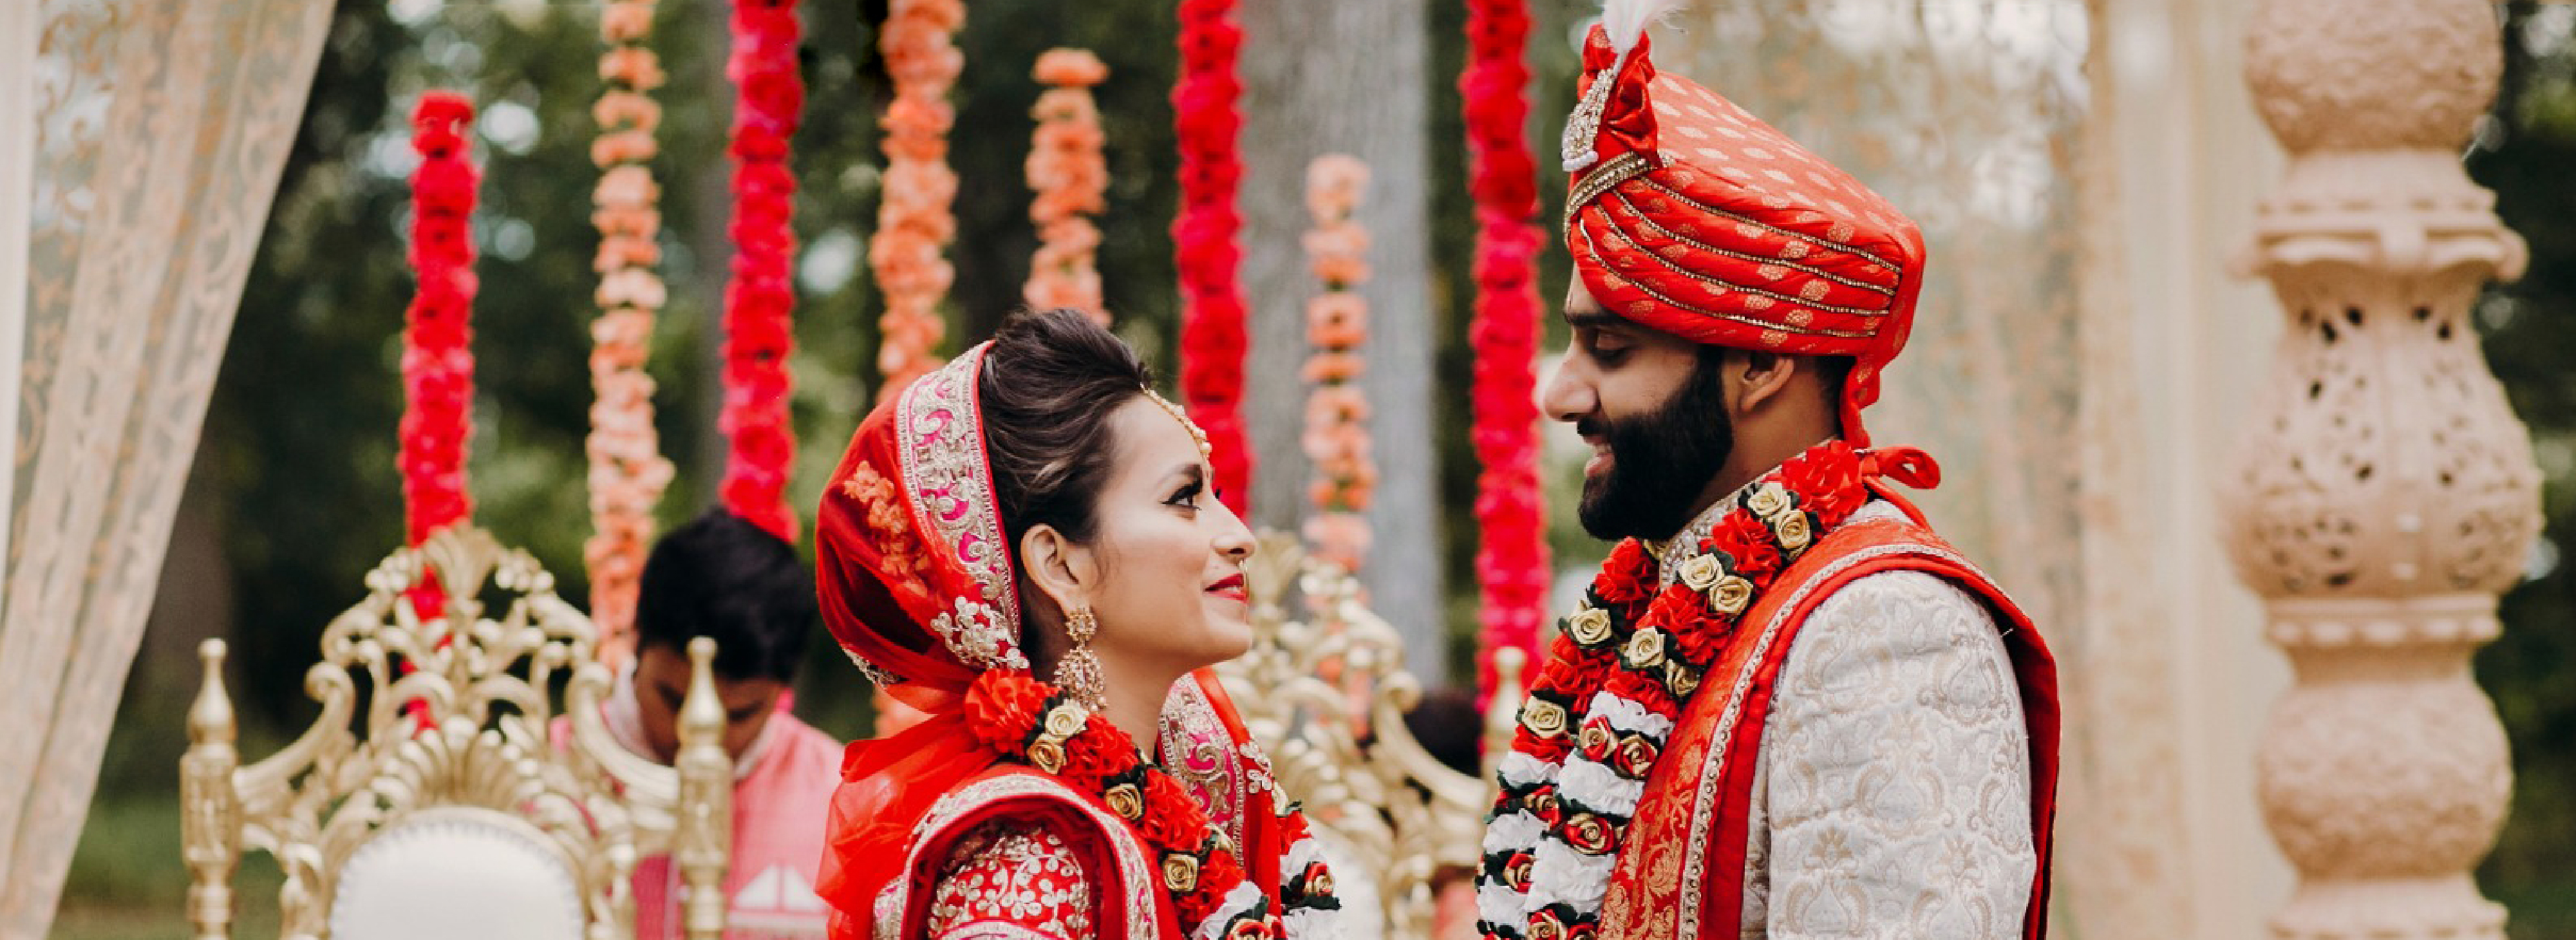 5 Ways to Level Up Your Indian Wedding Invitation Game, Wedding Planning  and Ideas